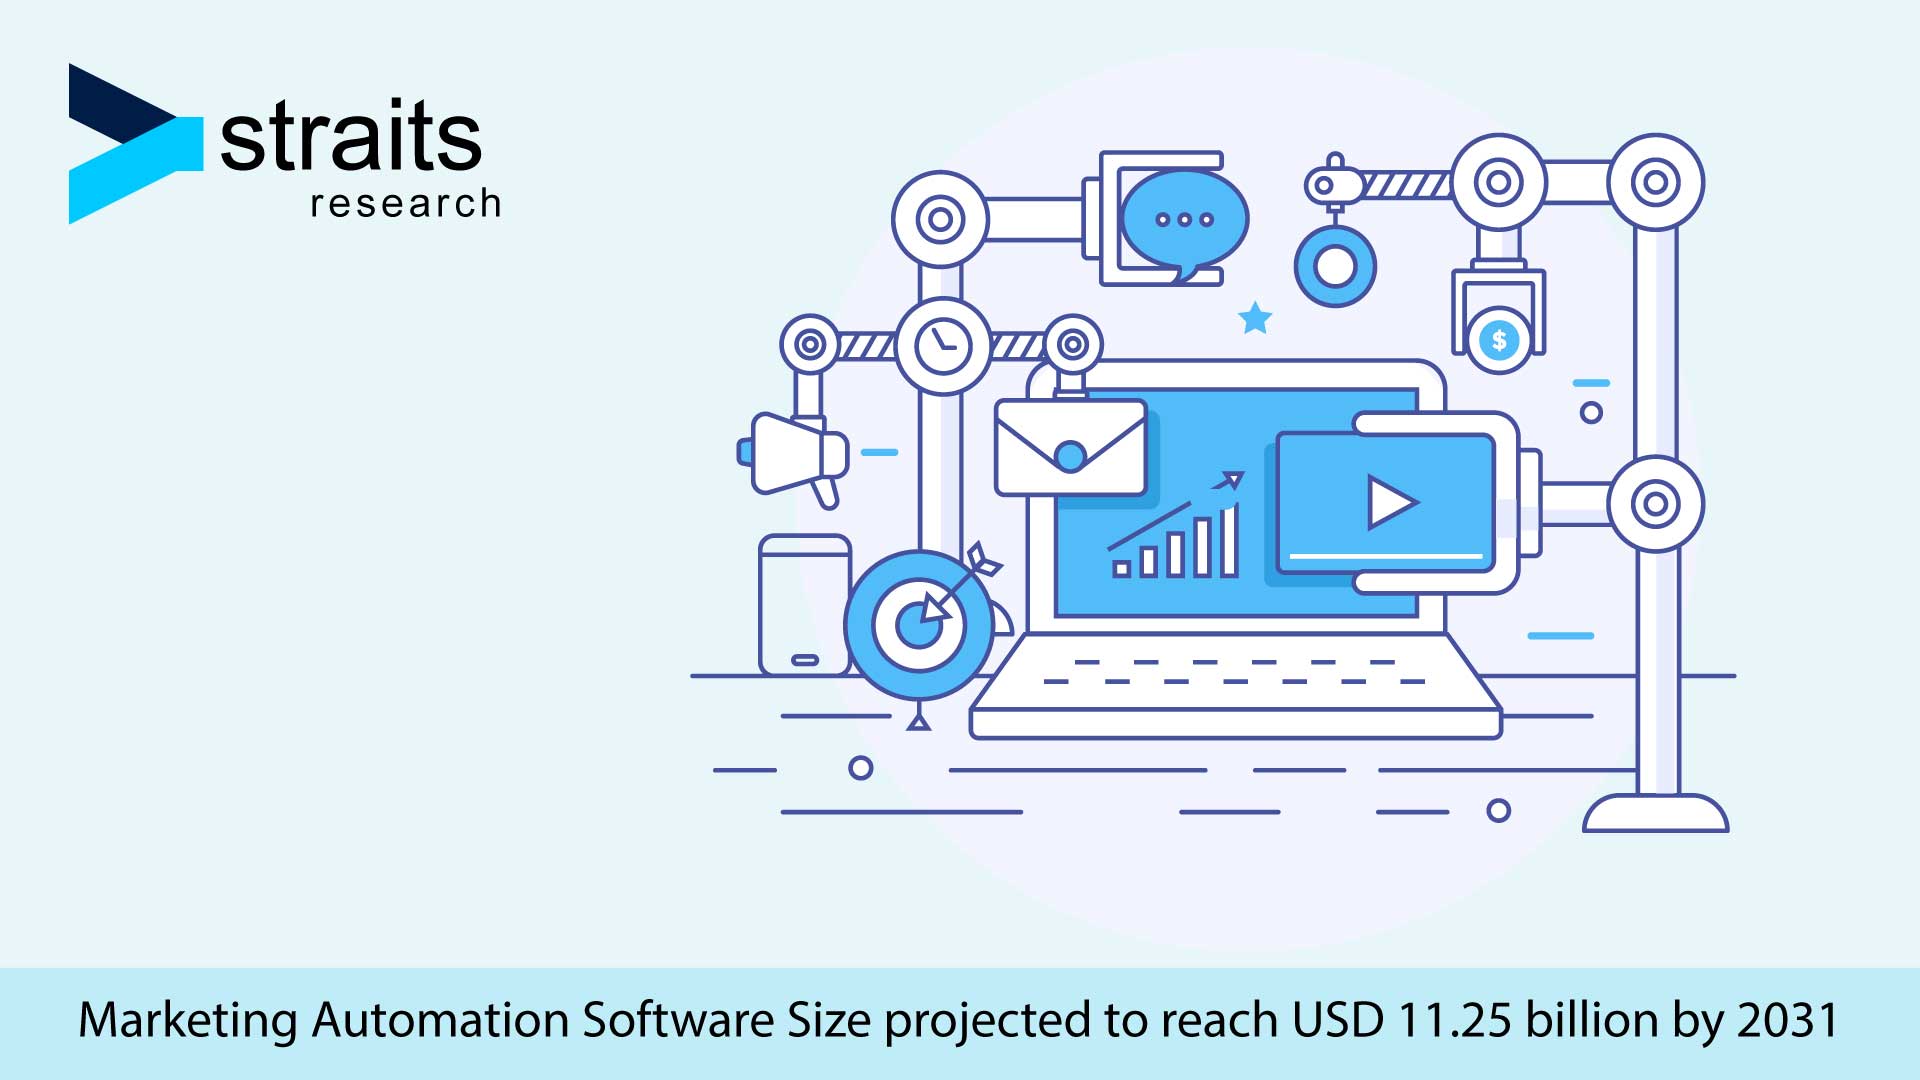 Marketing Automation Software Size is projected to reach USD 11.25 billion by 2031, growing at a CAGR of 9.6%: Straits Research